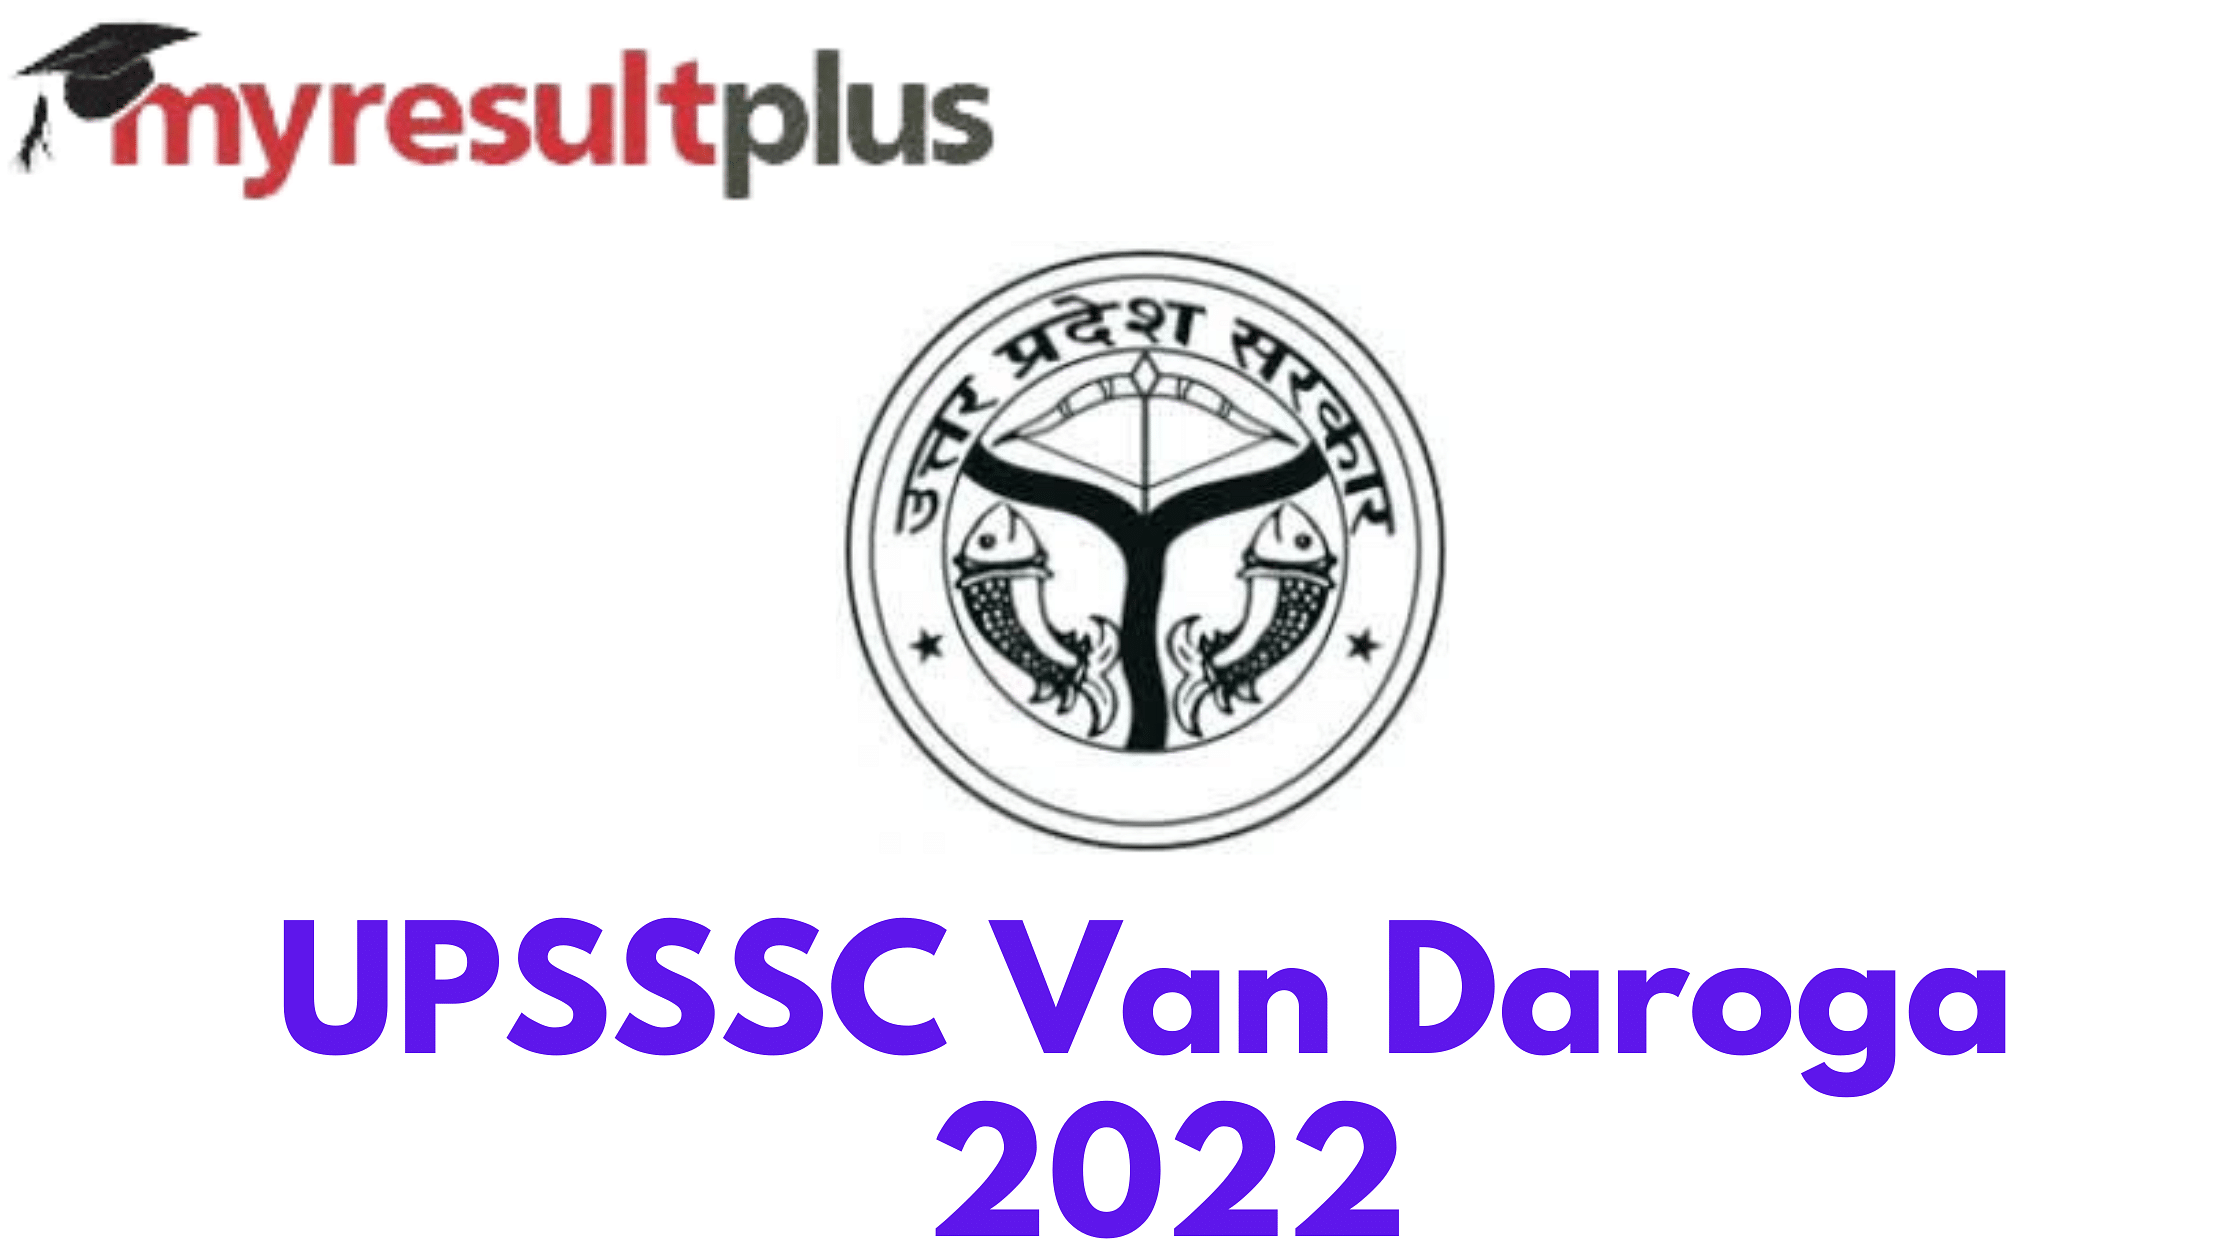 UPSSSC Van Daroga Main Registration Commences, Know How to Apply Here